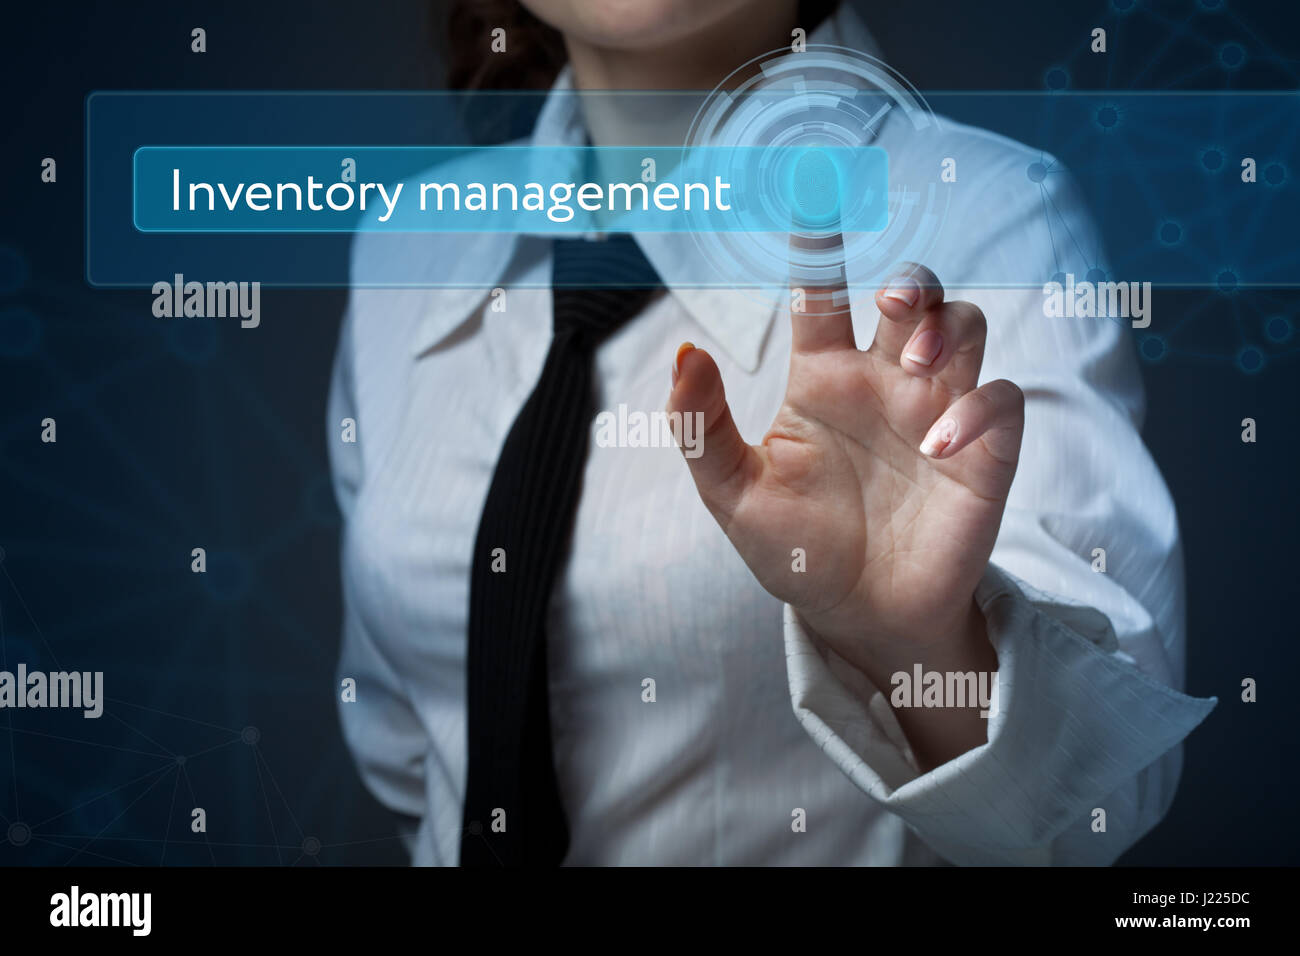 Business, technology, internet and networking concept. Business woman presses a button on the virtual screen: Inventory management Stock Photo